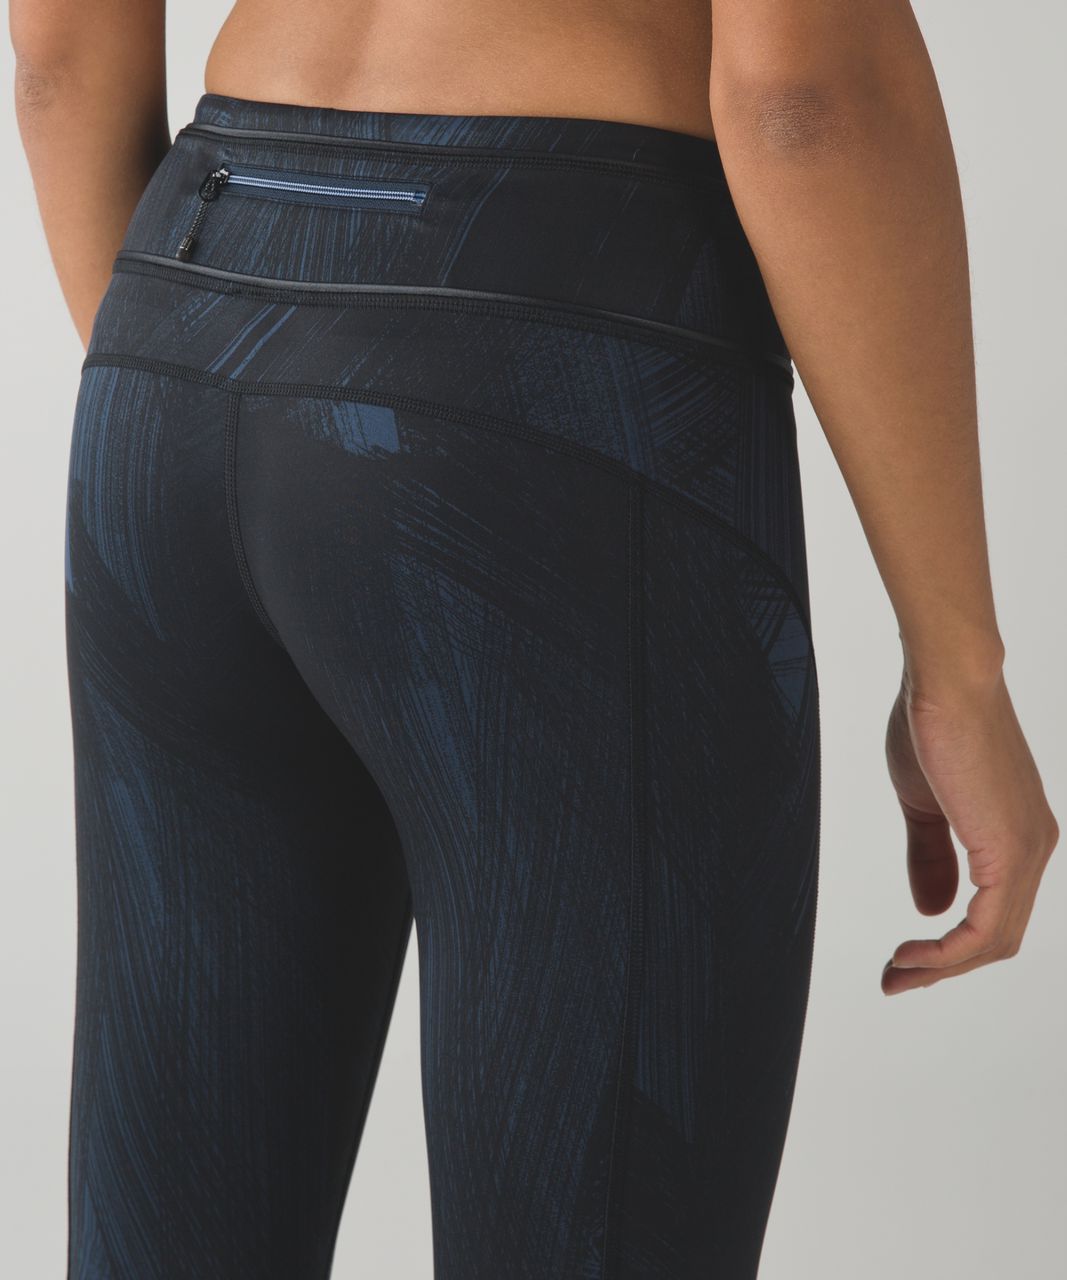 Lululemon Pace Queen Tight *Full-On Luxtreme - Wind Chill Deep Navy Black